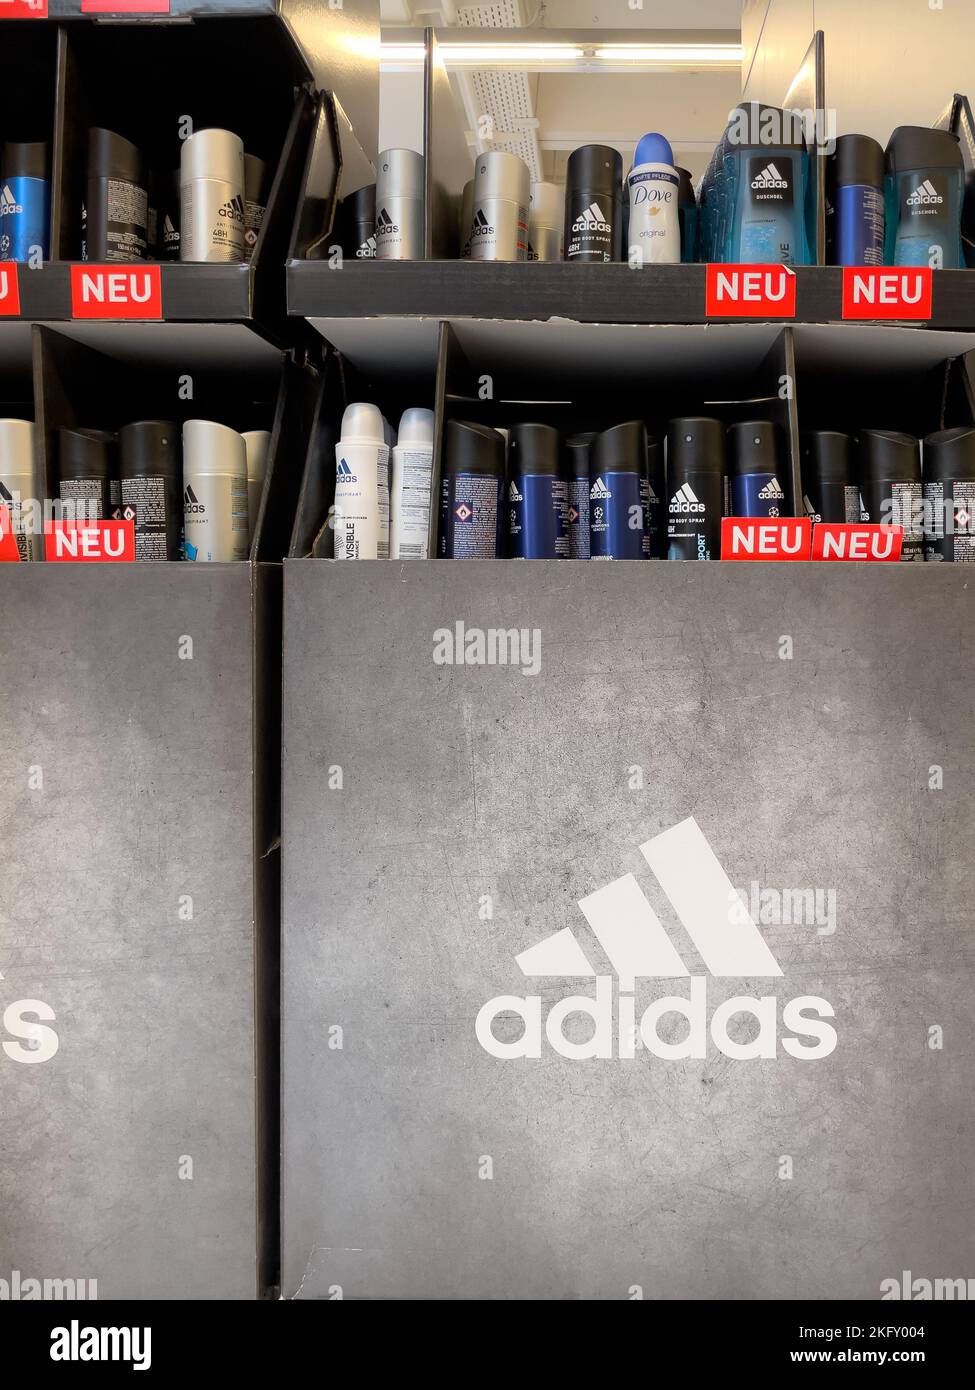 Nuremberg, Germany - June 04, 2022: Adidas cosmetics with Logo in a german  Supermarket. Adidas is a german multinational corporation Stock Photo -  Alamy